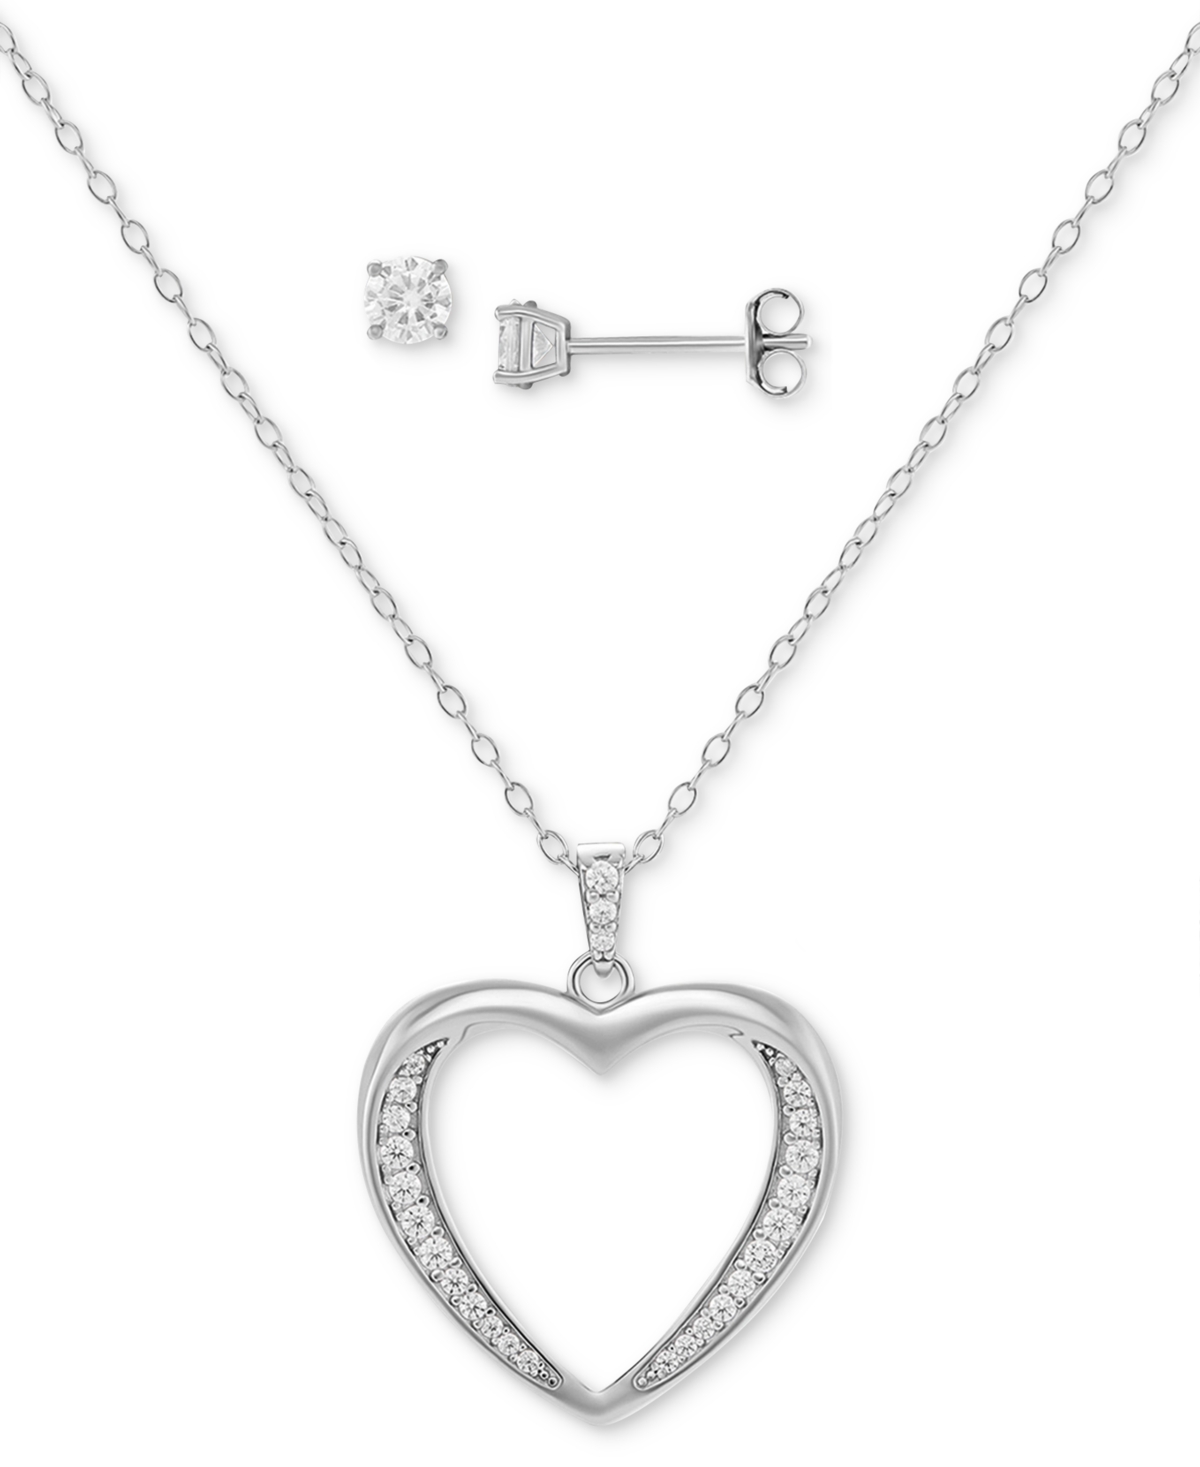 2-Pc. Set Cubic Zirconia Open Heart Pendant Necklace & Solitaire Stud Earrings in Sterling Silver, Created for Macy's - Sterling Silver